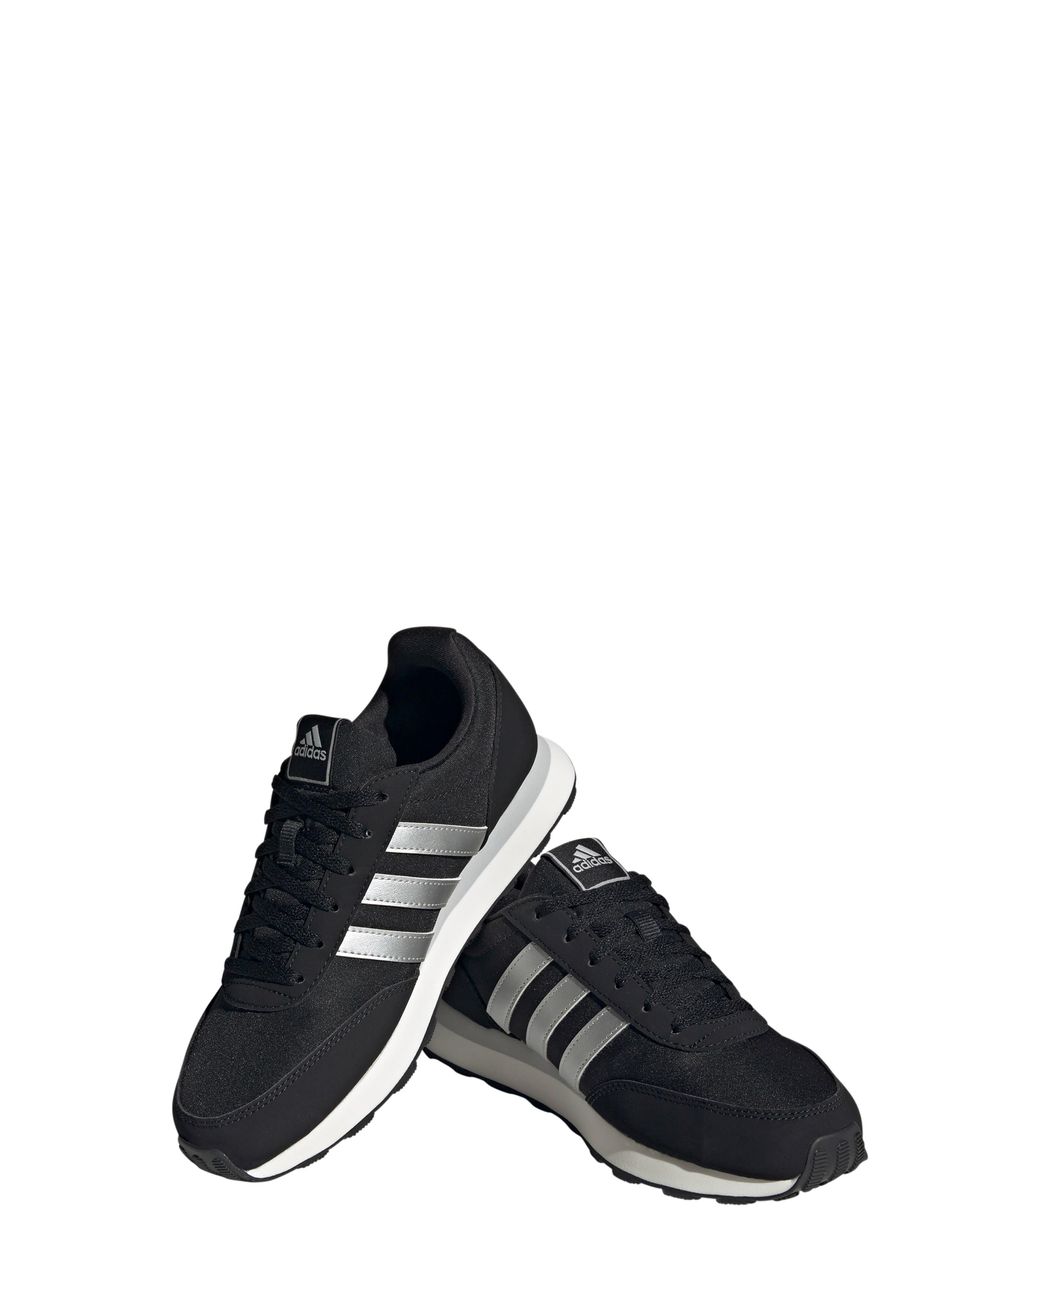 adidas Run 60s 3.0 Athletic Sneaker In Black/silver/white At Nordstrom Rack  | Lyst